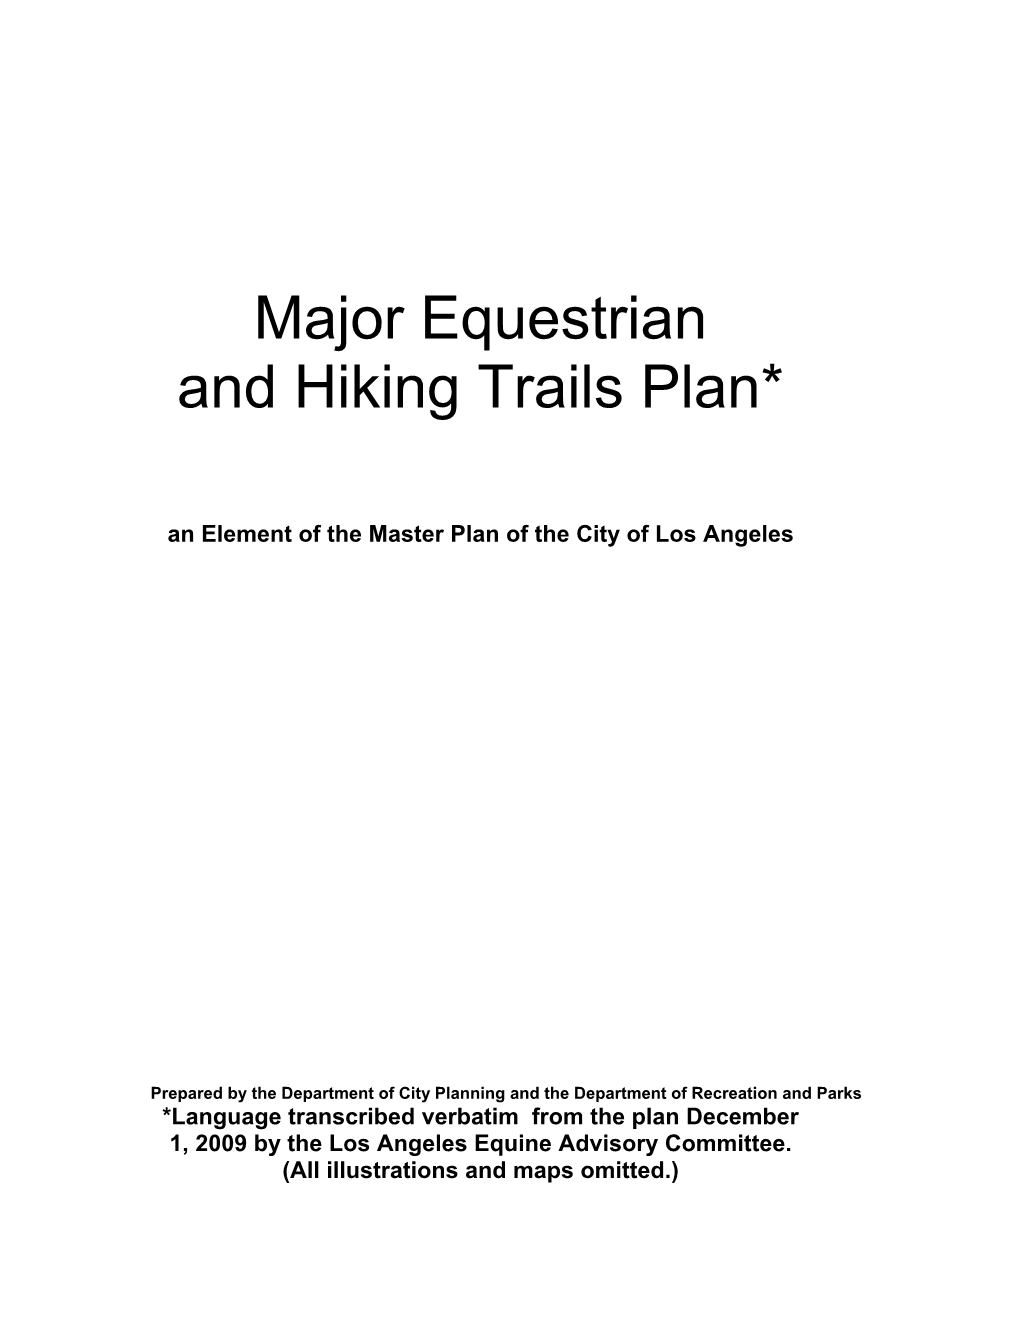 Major Equestrian and Hiking Trails Plan*